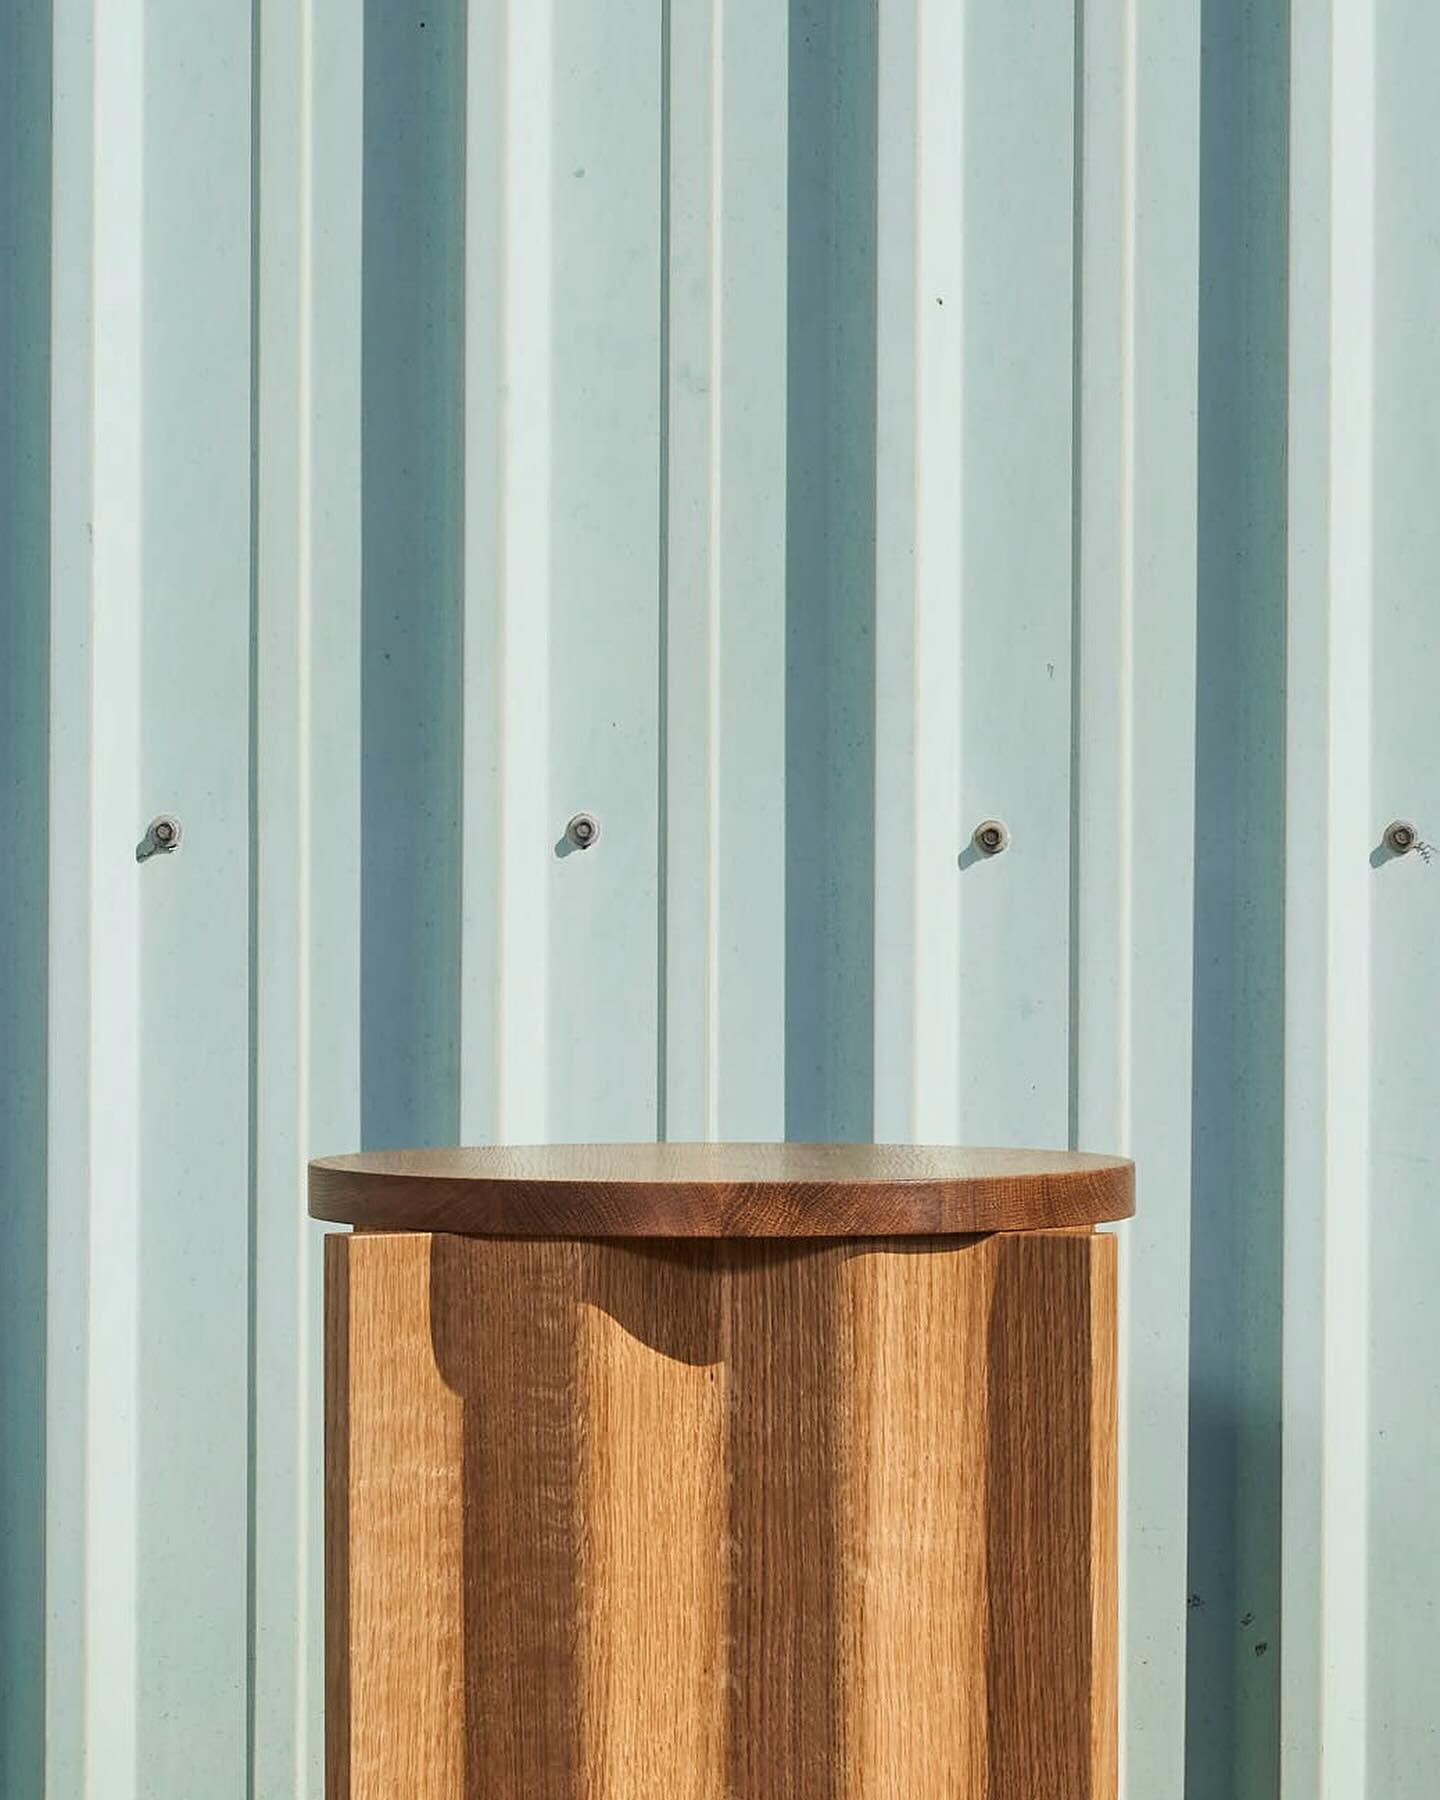 Corrugated Collection launching May 14th.

#furniture #furnituredesign #handmade #design #interiors #interiordesign #homedecor #homedesign #objectdesign